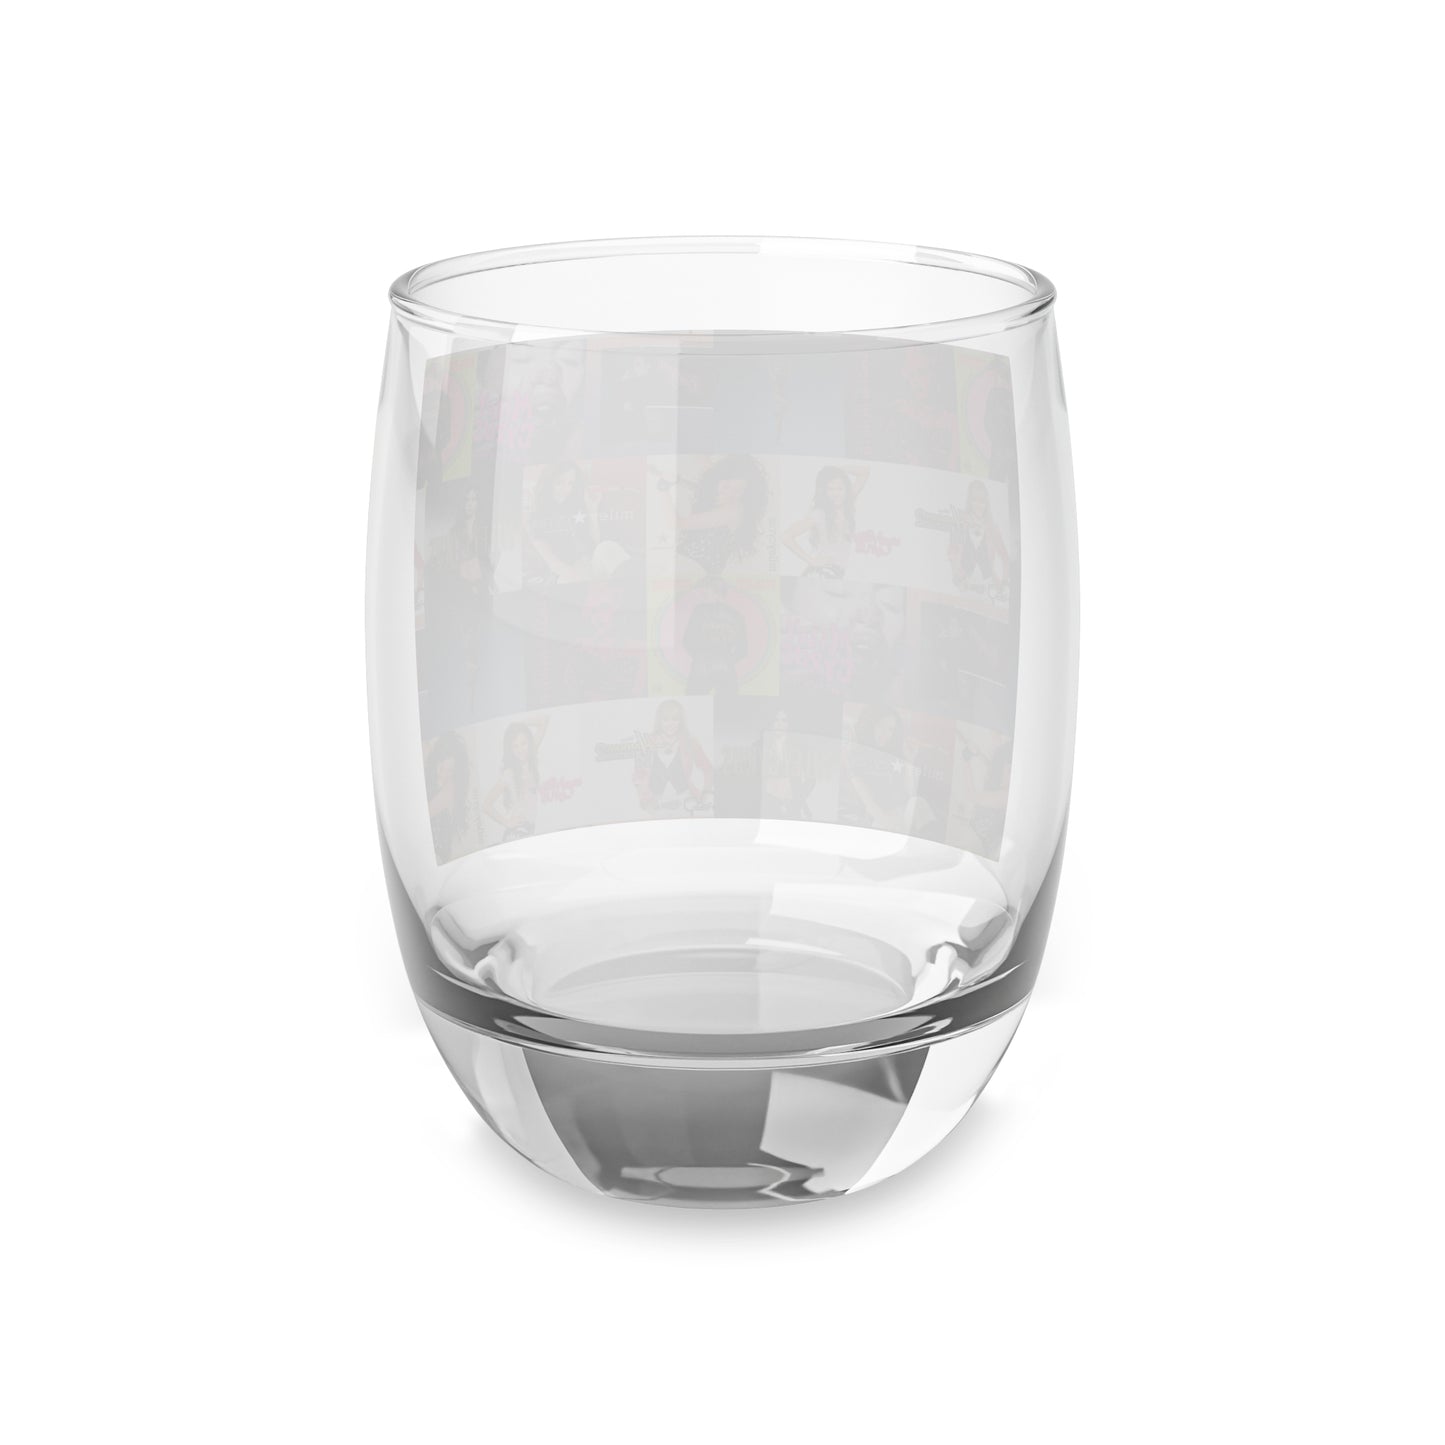 Miley Cyrus Album Cover Collage Whiskey Glass